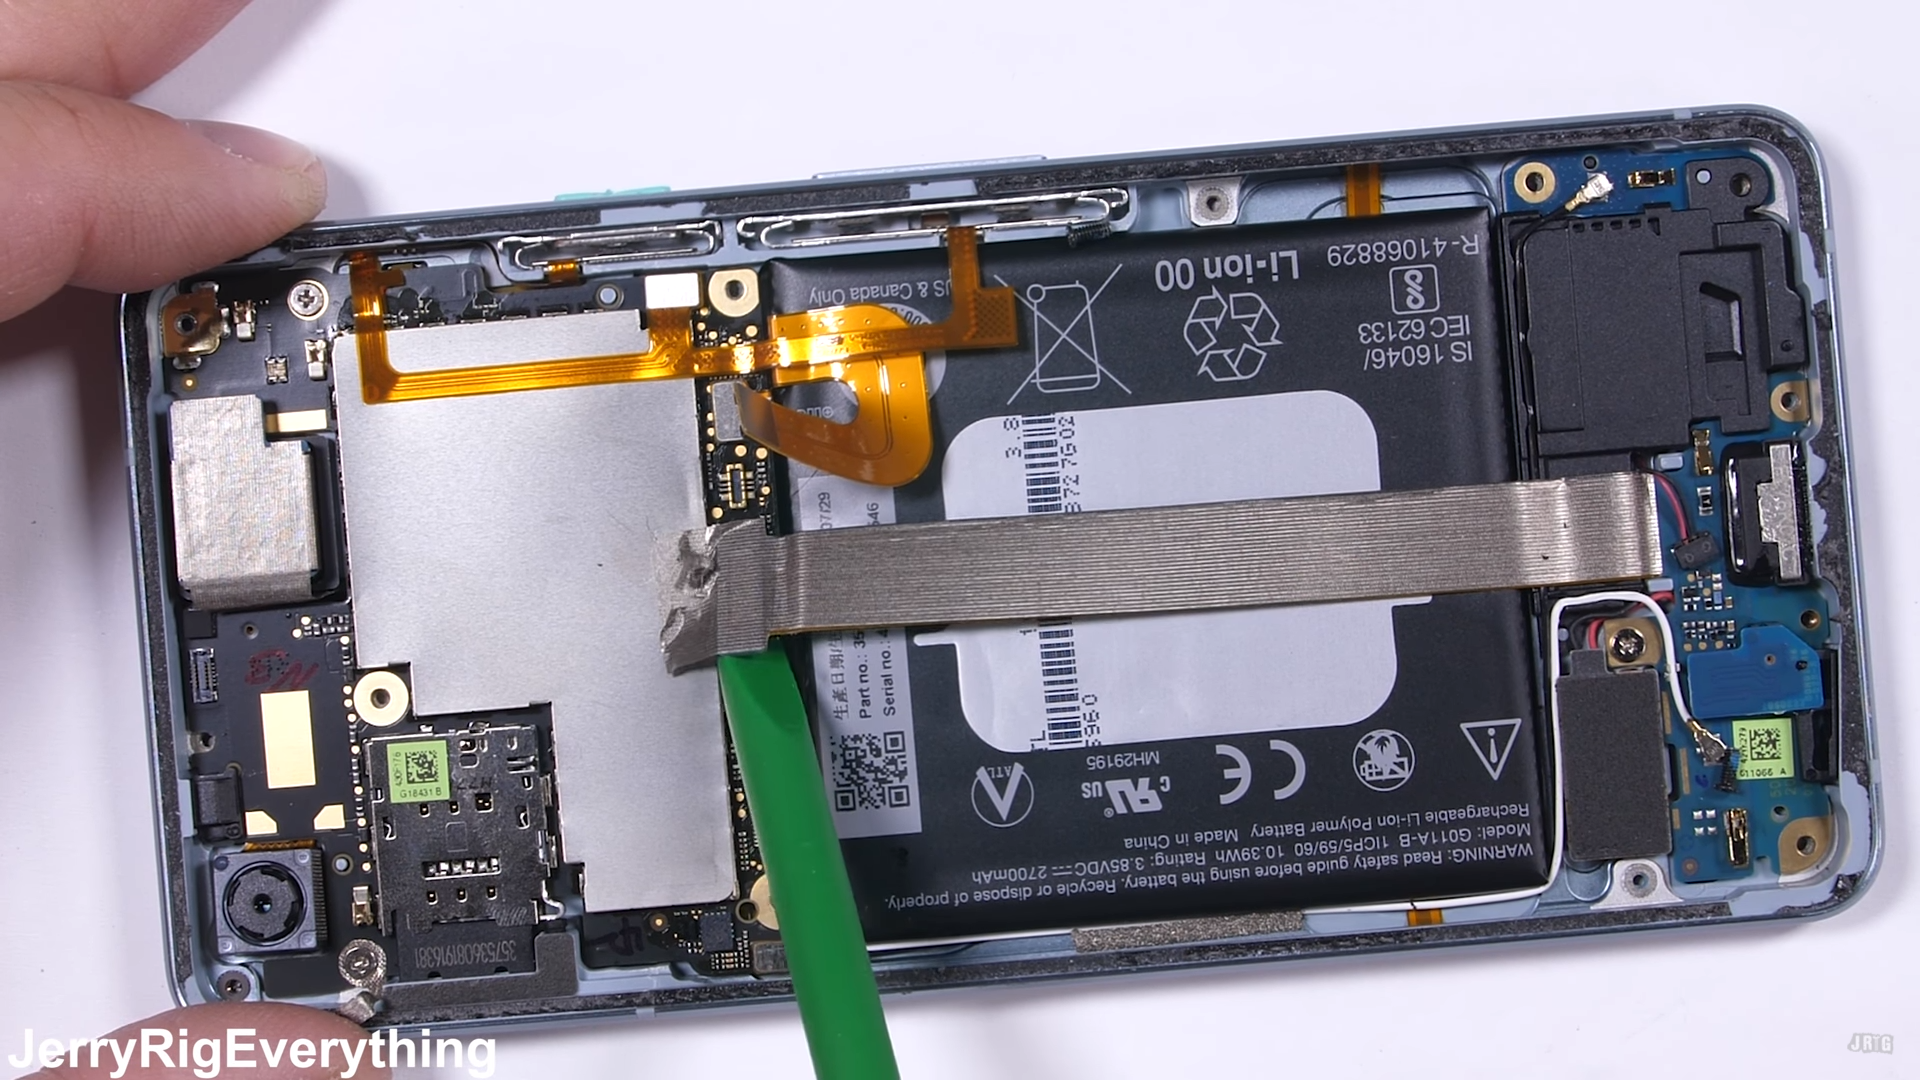 What's inside the Pixel 2? Watch the phone get disassembled on video